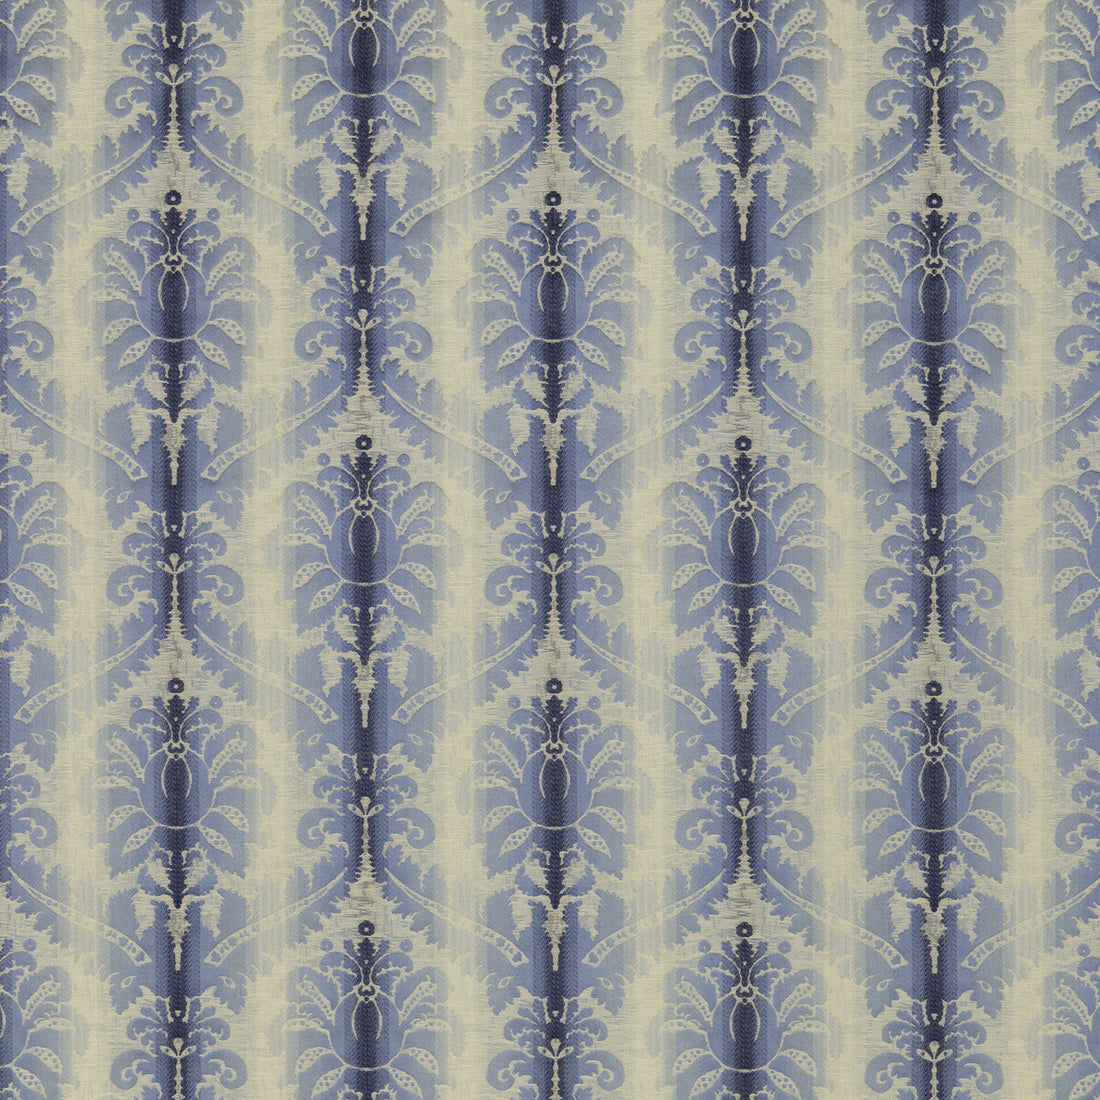 Poivre Damask fabric in indigo/sky color - pattern 8018106.5.0 - by Brunschwig &amp; Fils in the Cevennes collection